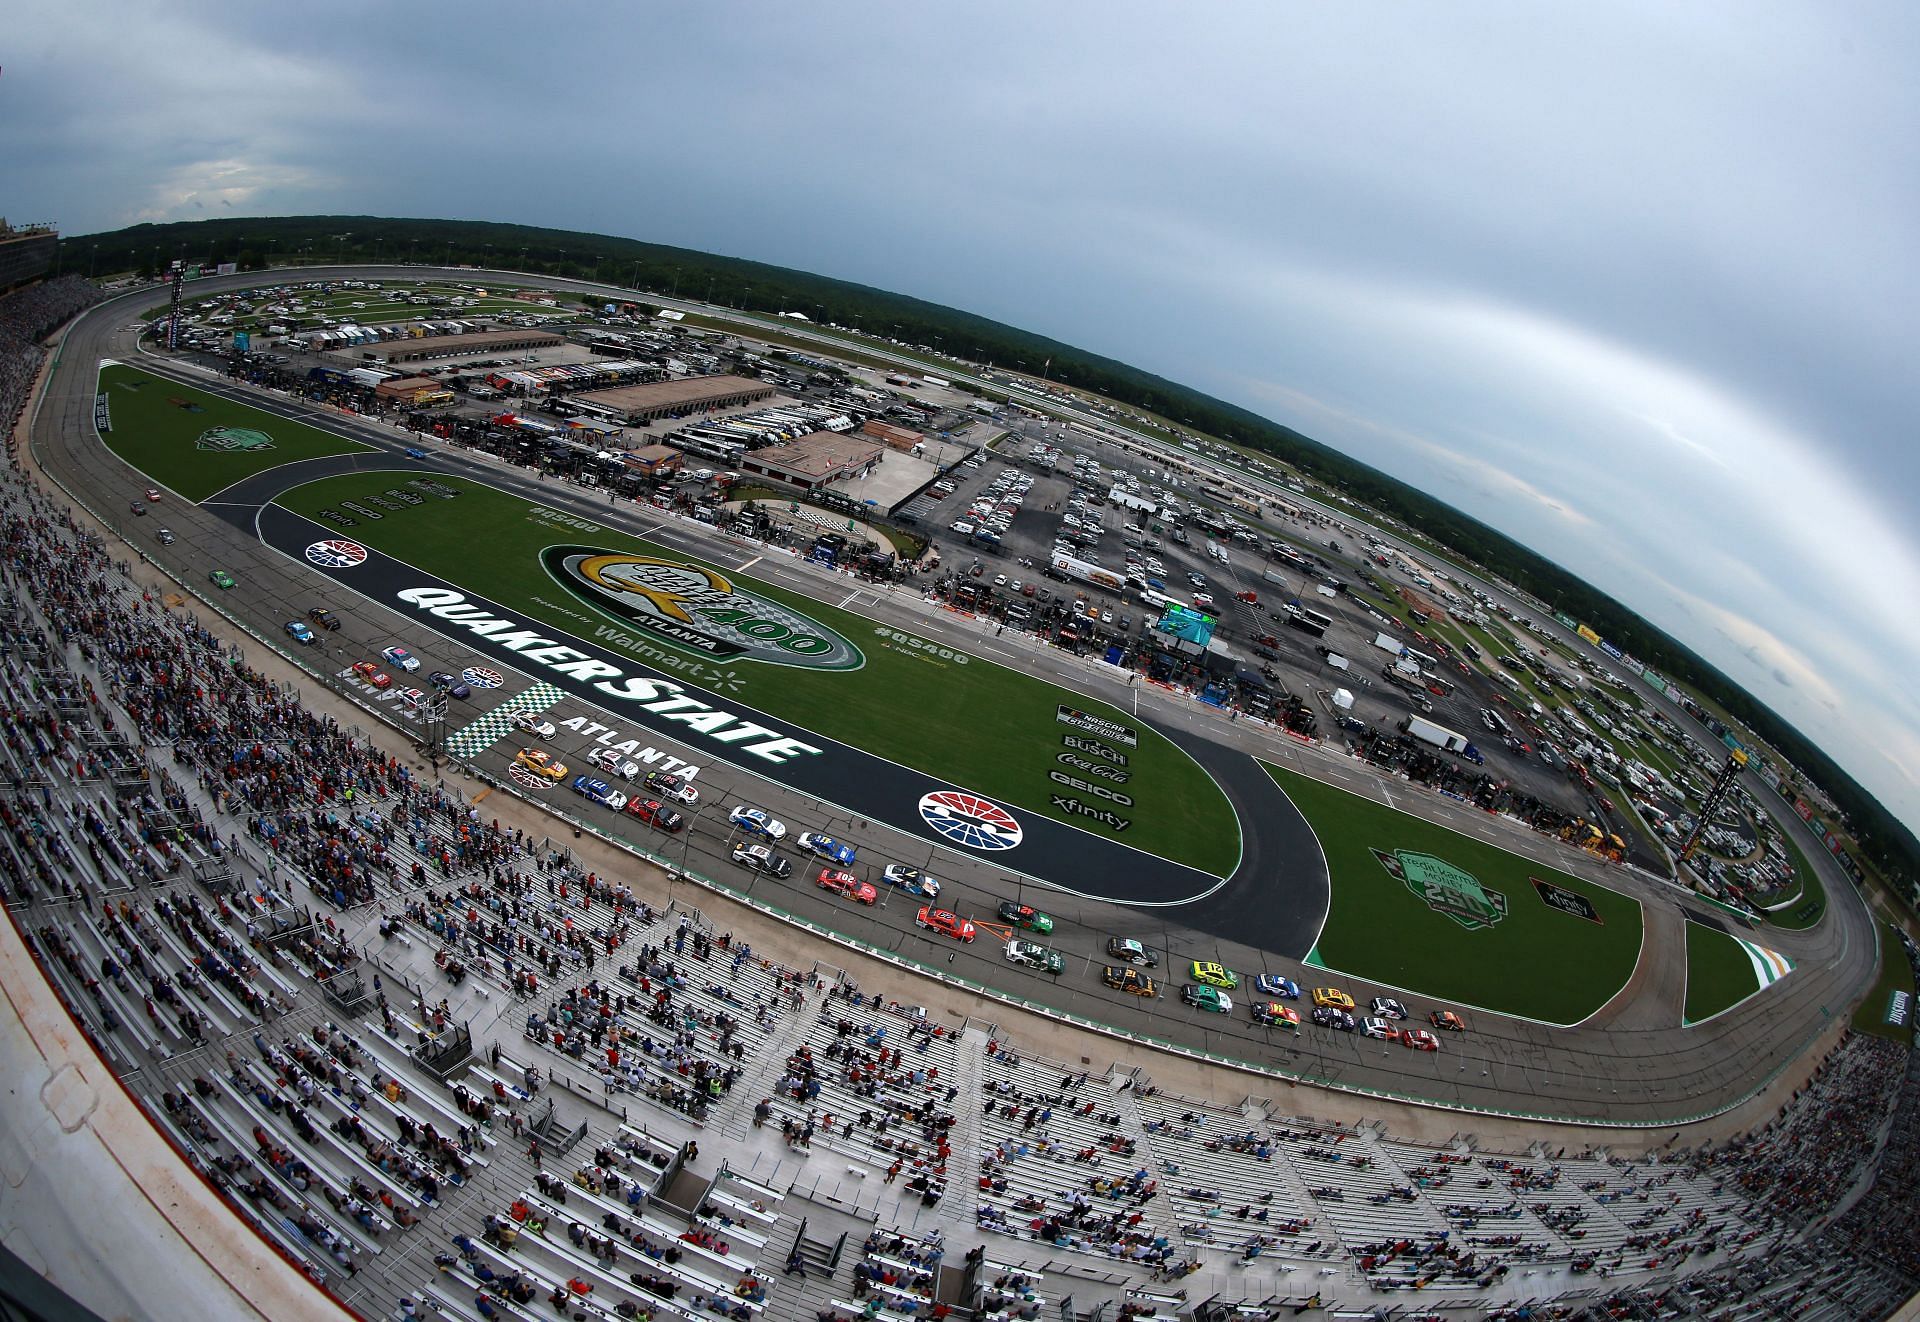 Aerial view of the Atlanta Motor Speedway during the NASCAR Cup Series Quaker State 400 presented by Walmart in 2021 (Photo by Sean Gardner/Getty Images)